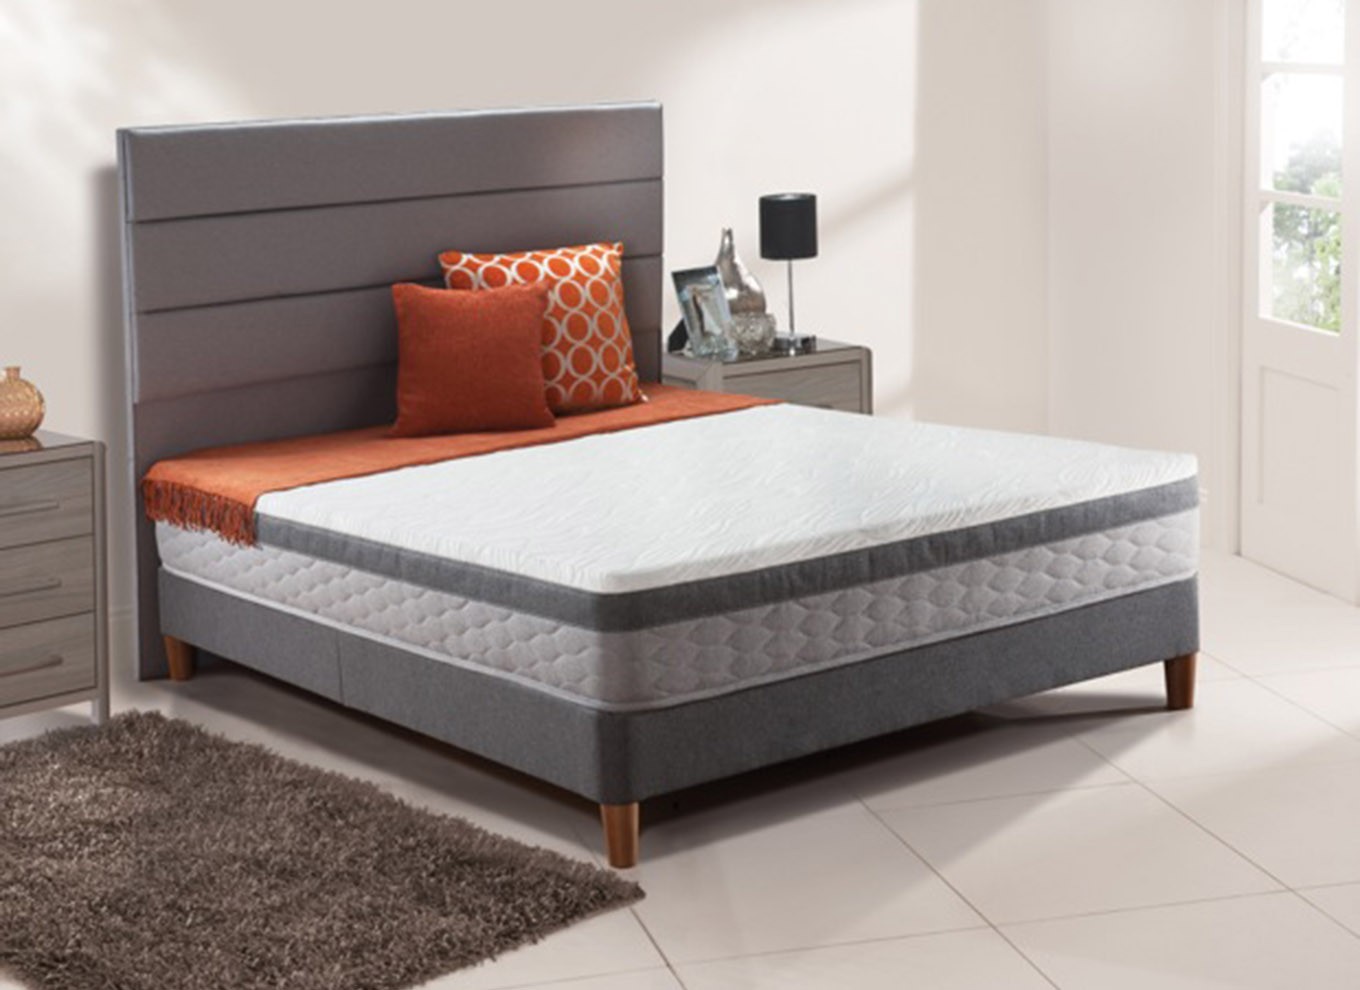 4`6 Double Sealy Ambience Posturepedic Spring Divan Bed